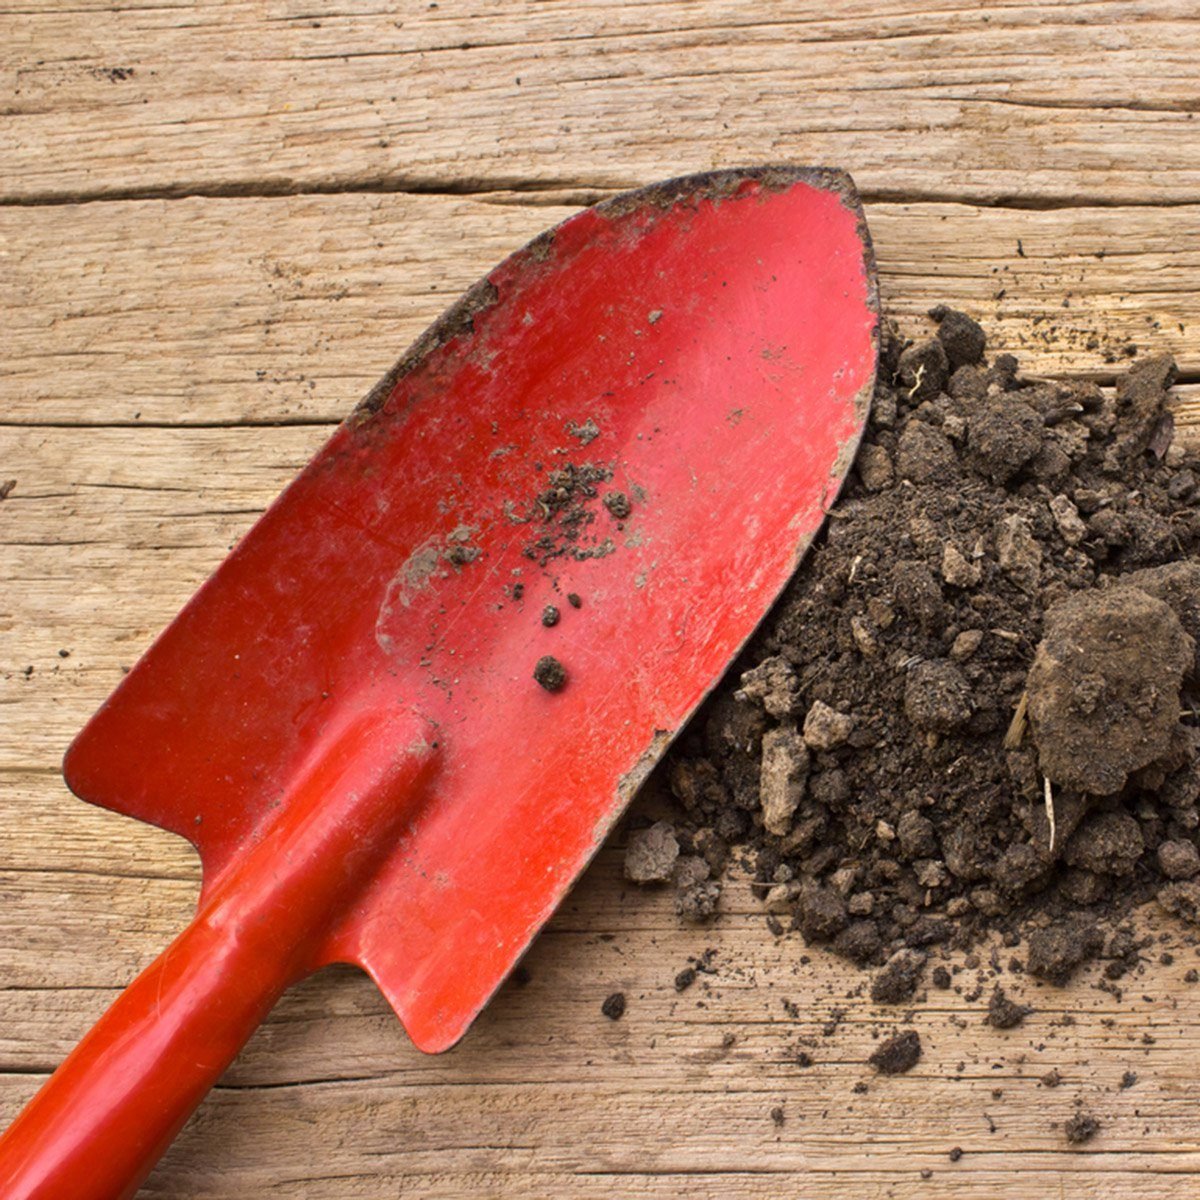 What Every Gardener Should Know About Topsoil